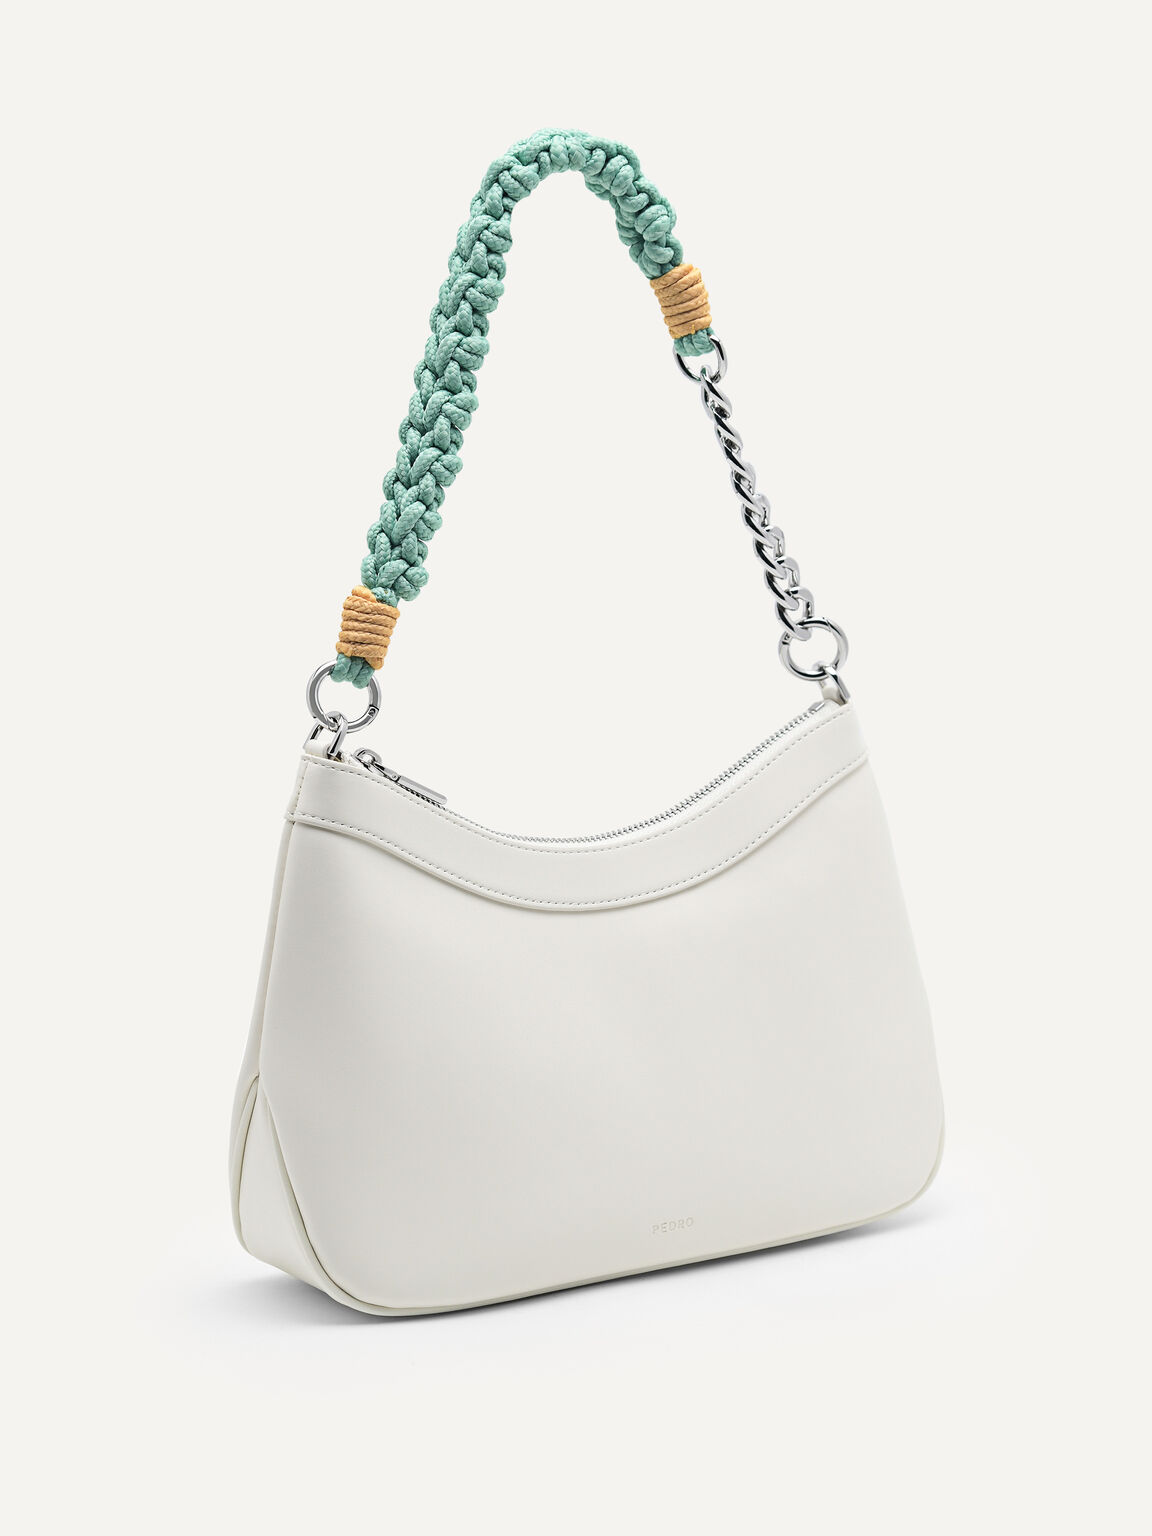 Slouchy Shoulder Bag with Braided Chain, Chalk